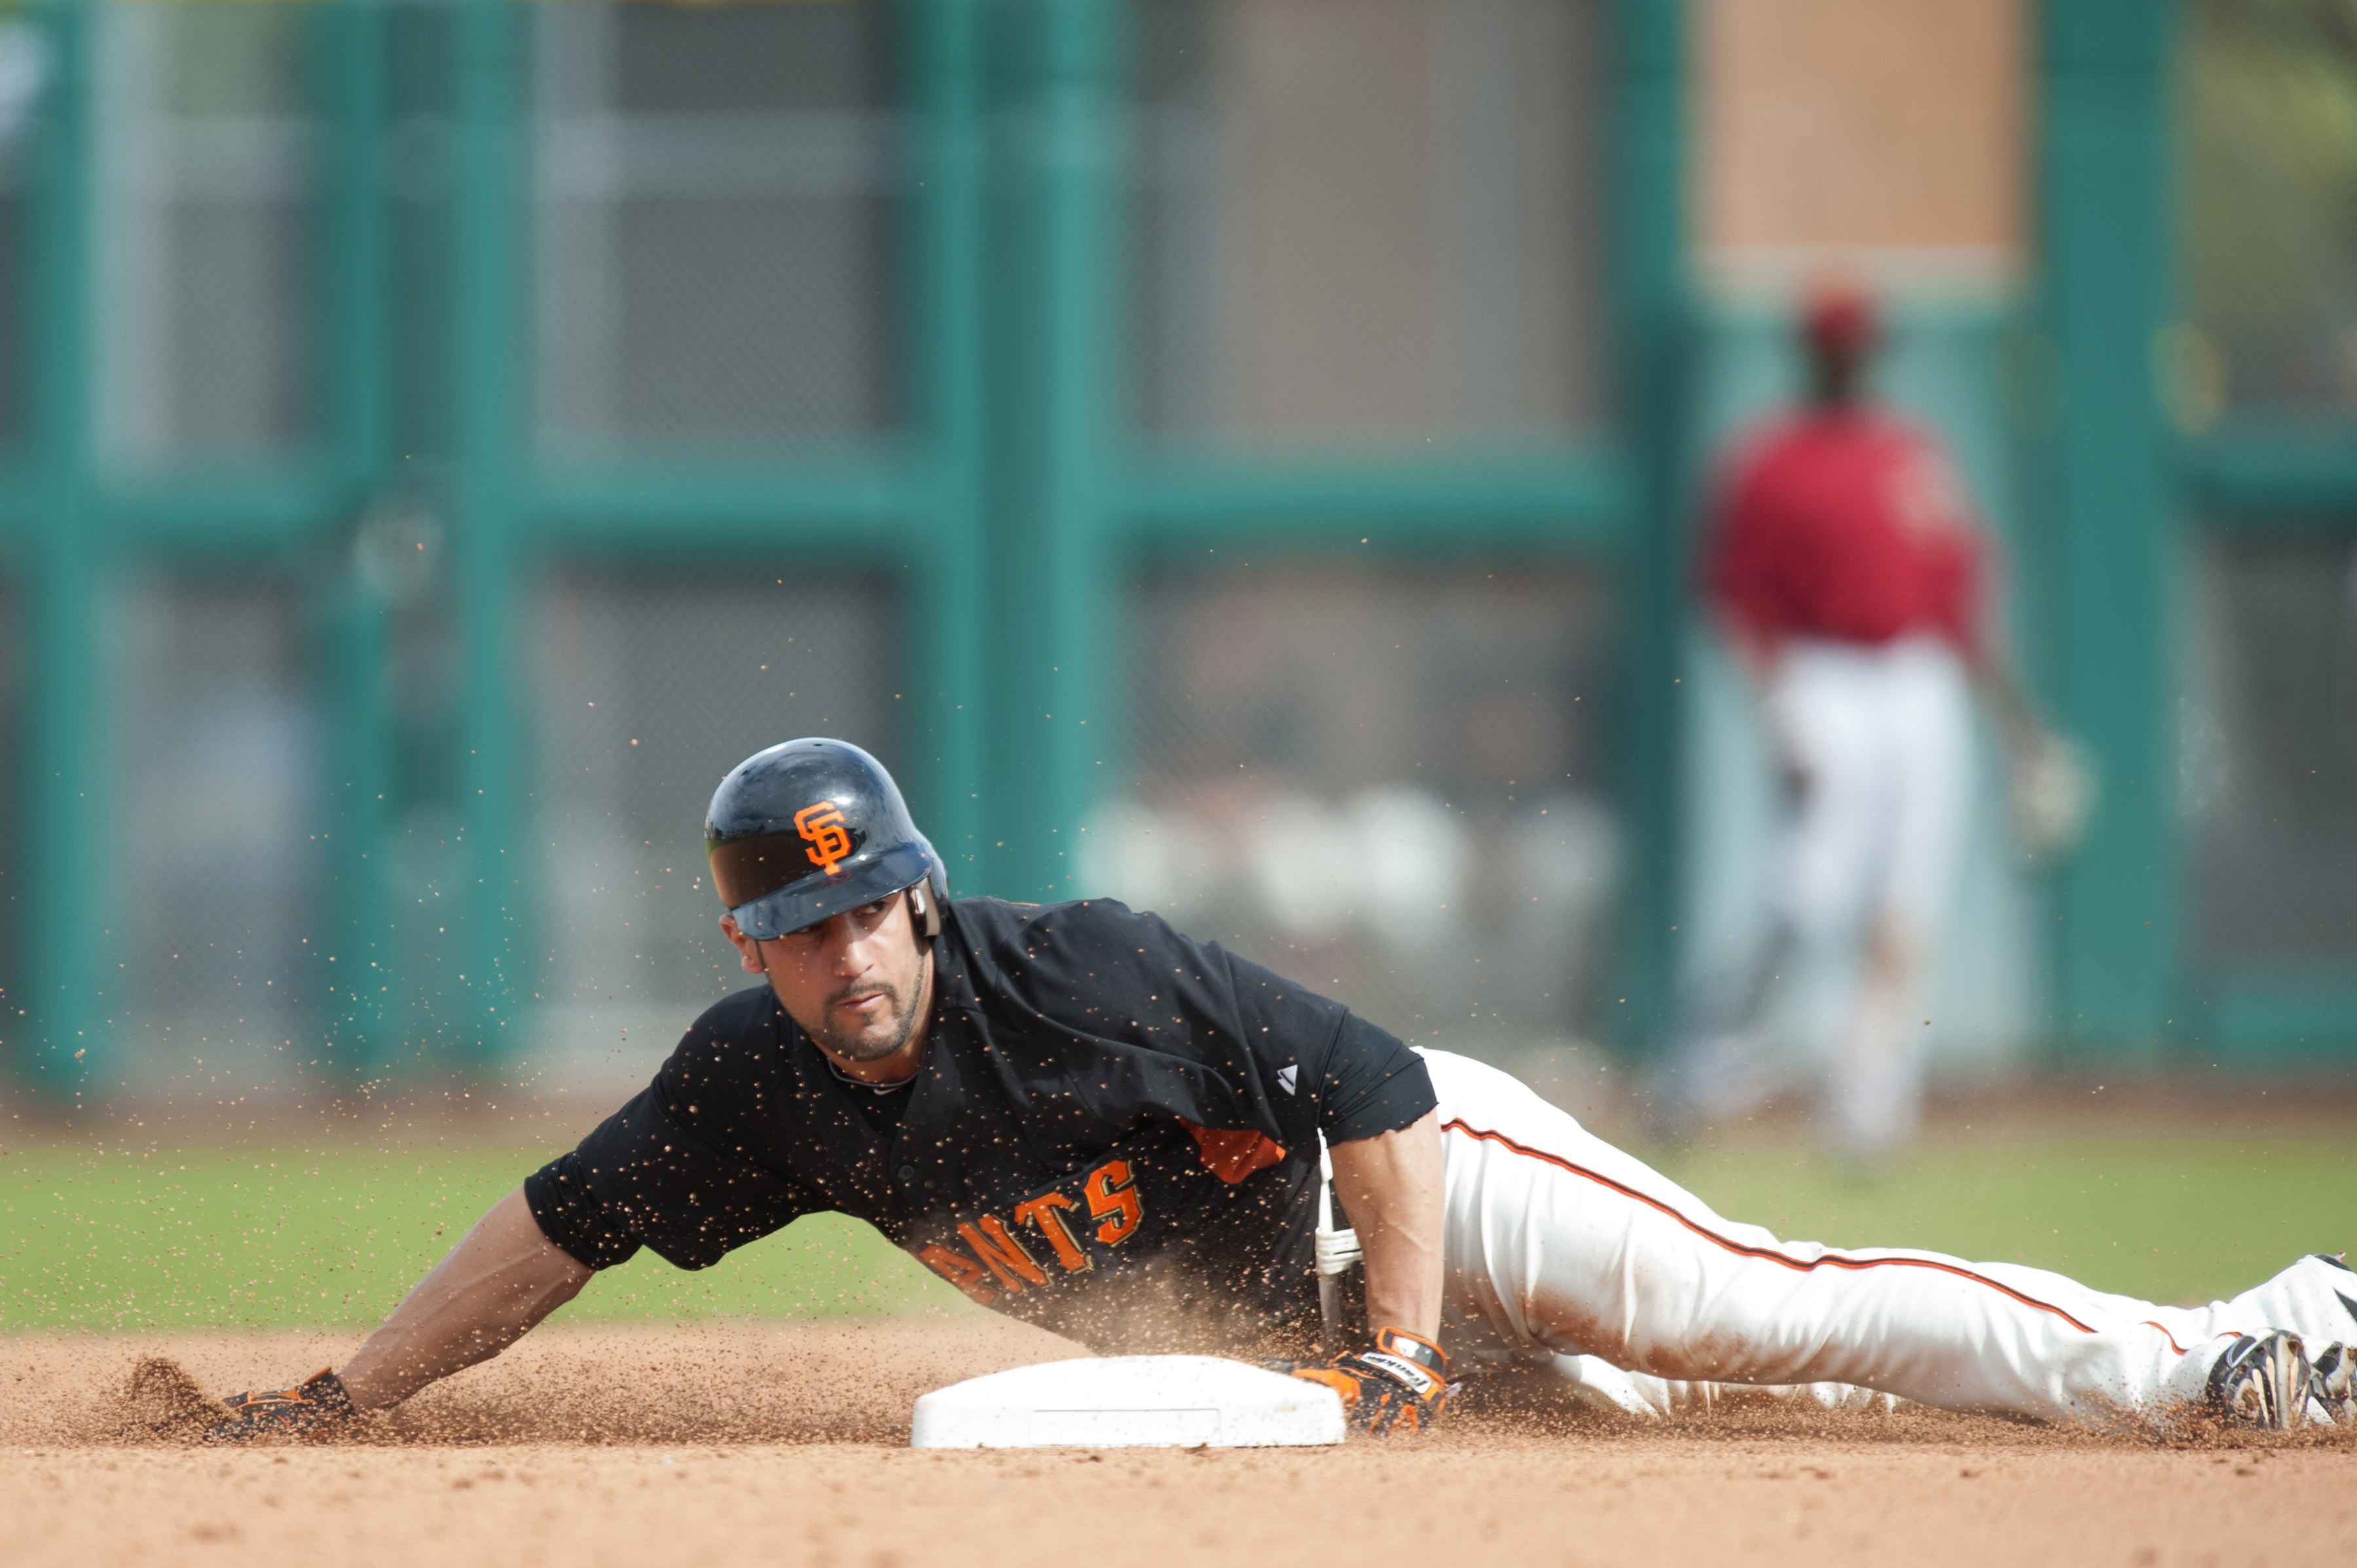 SCOTTSDALE, AZ - FEBRUARY 25: Andres Torres #56  of the San Francisco Giants attempts to steal second base during a spring training game against the Arizona Diamondbacks at Scottsdale Stadium on February 25, 2011 in Scottsdale, Arizona. (Photo by Rob Trin